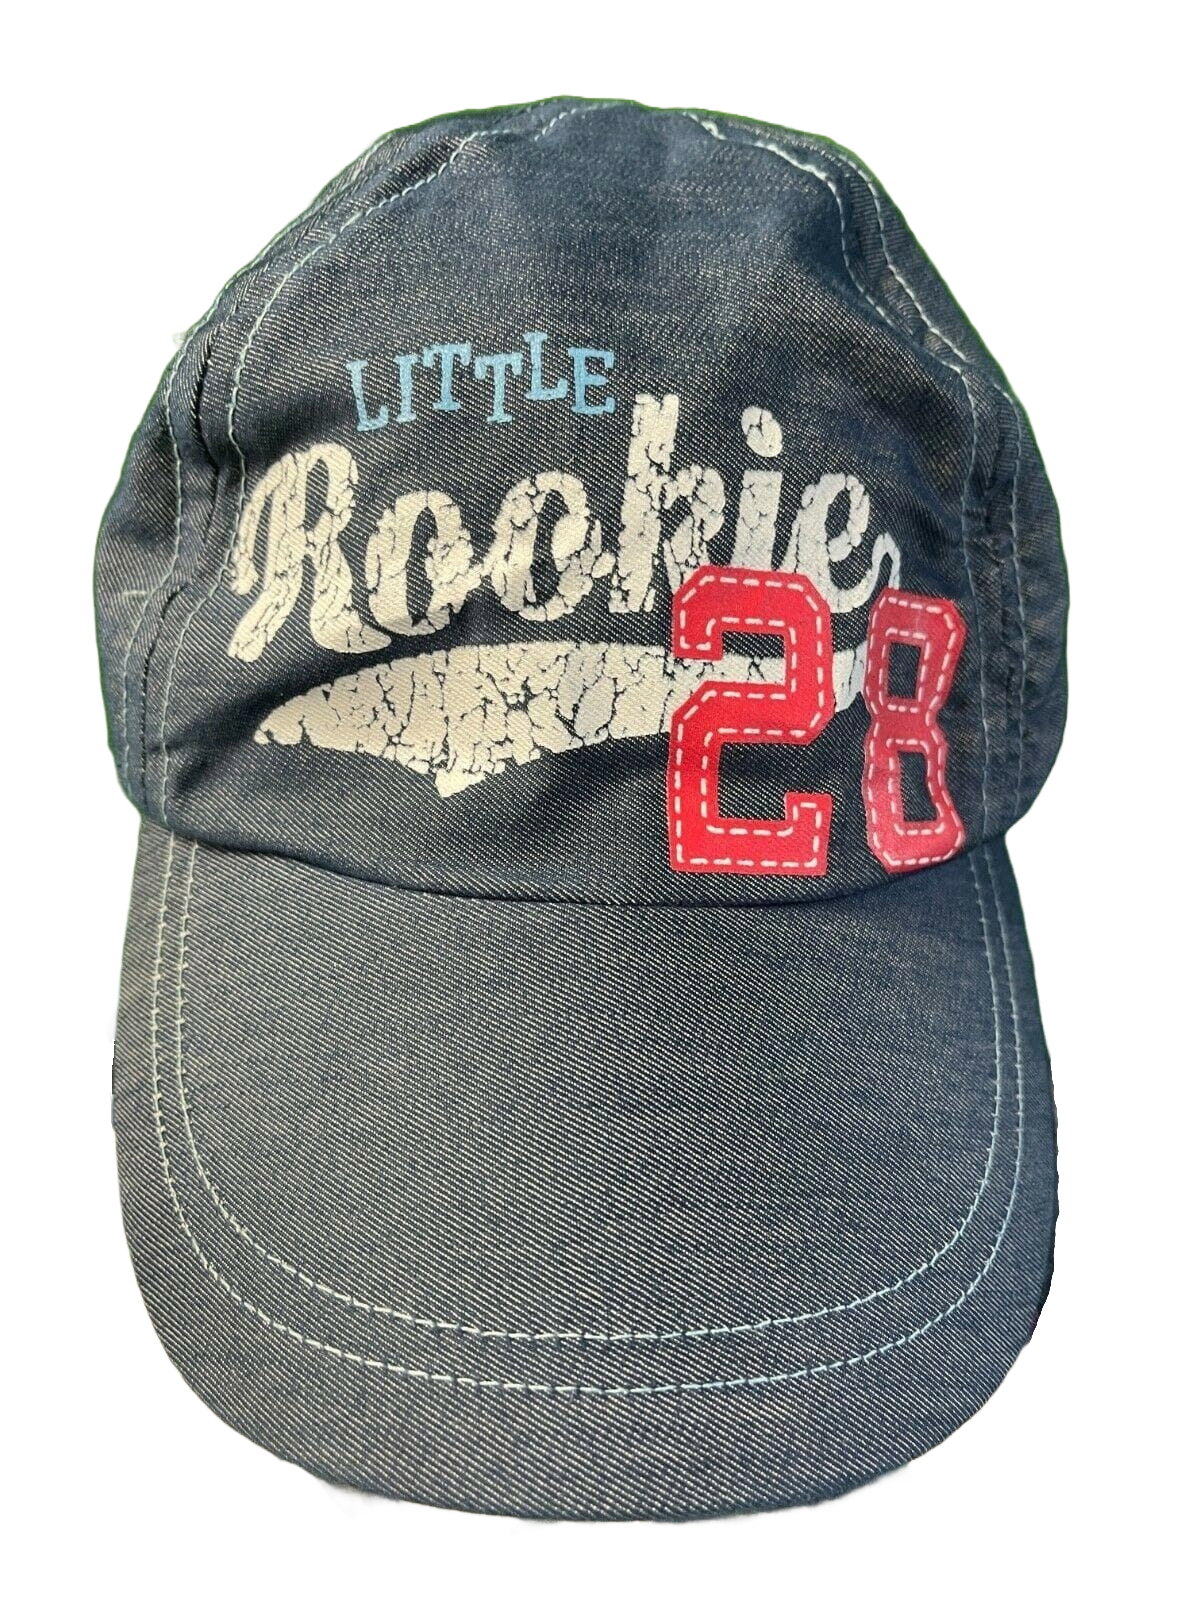 American Football "Little Rookie" Hat/Cap Infant Toddler 12-18 Months